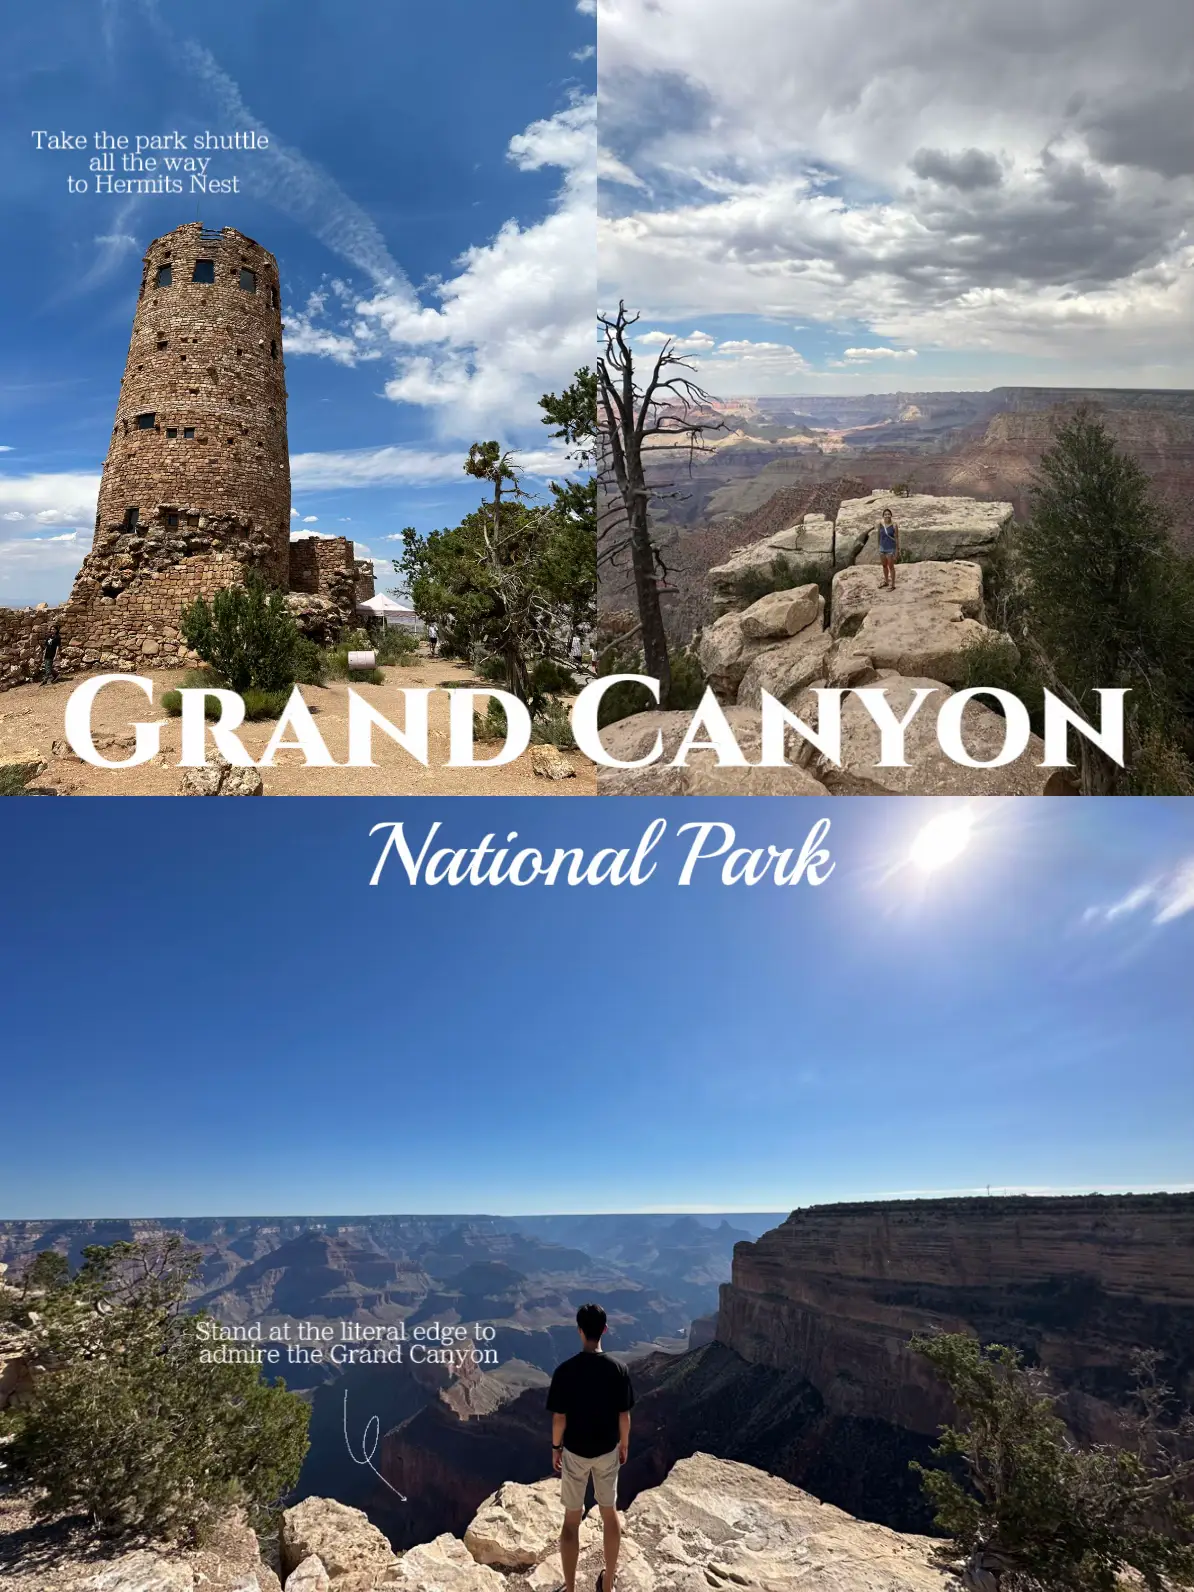 🇺🇸 OUR EPIC US TRIP: 6 National Parks in 10 DAYS!! 's images(6)